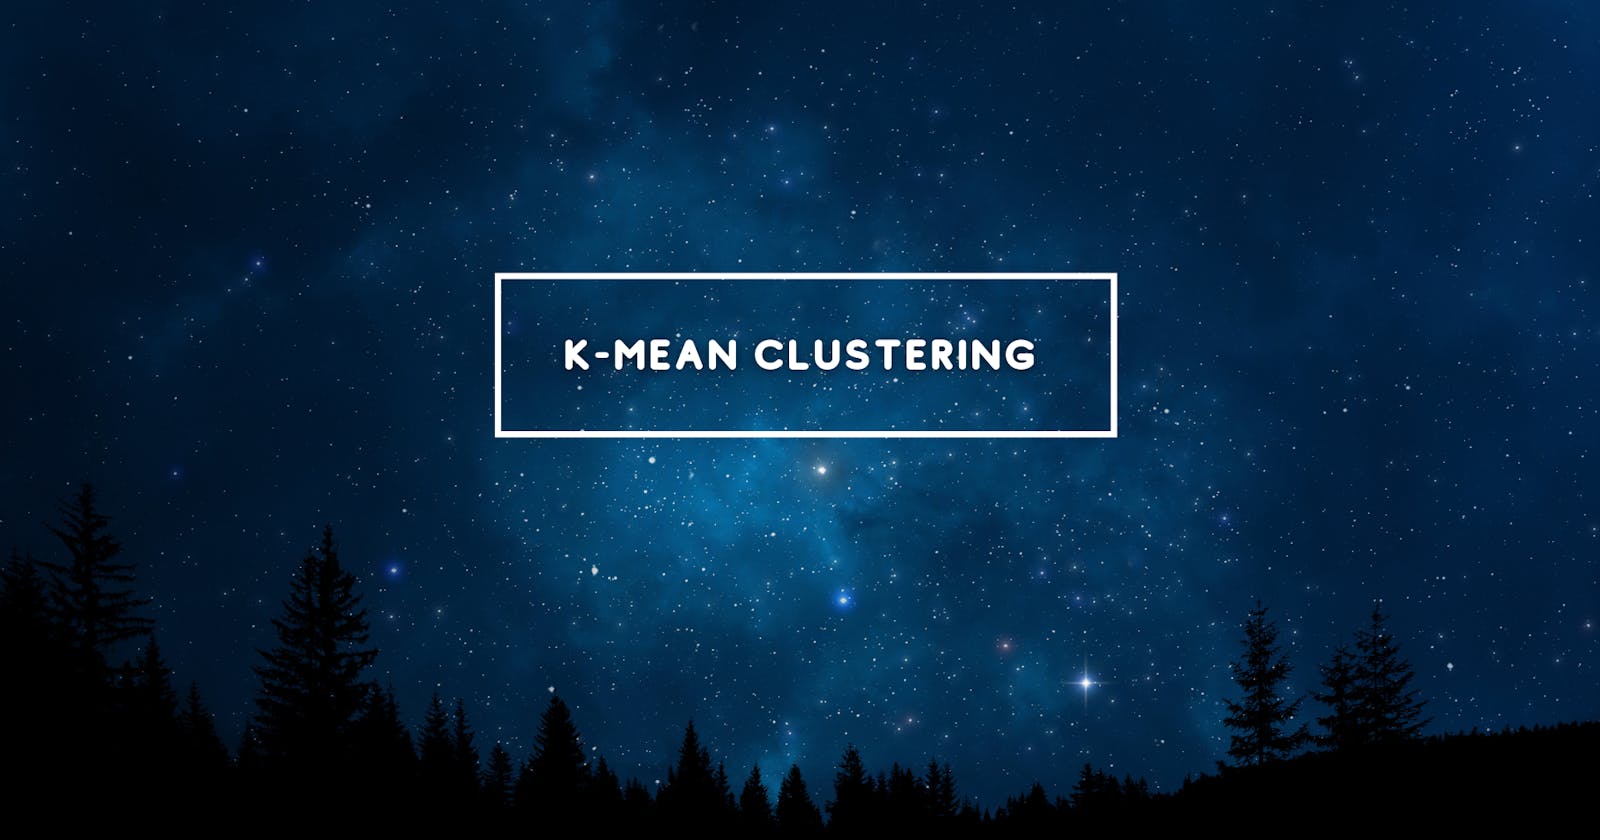 K-mean clustering and its use case in the security domain